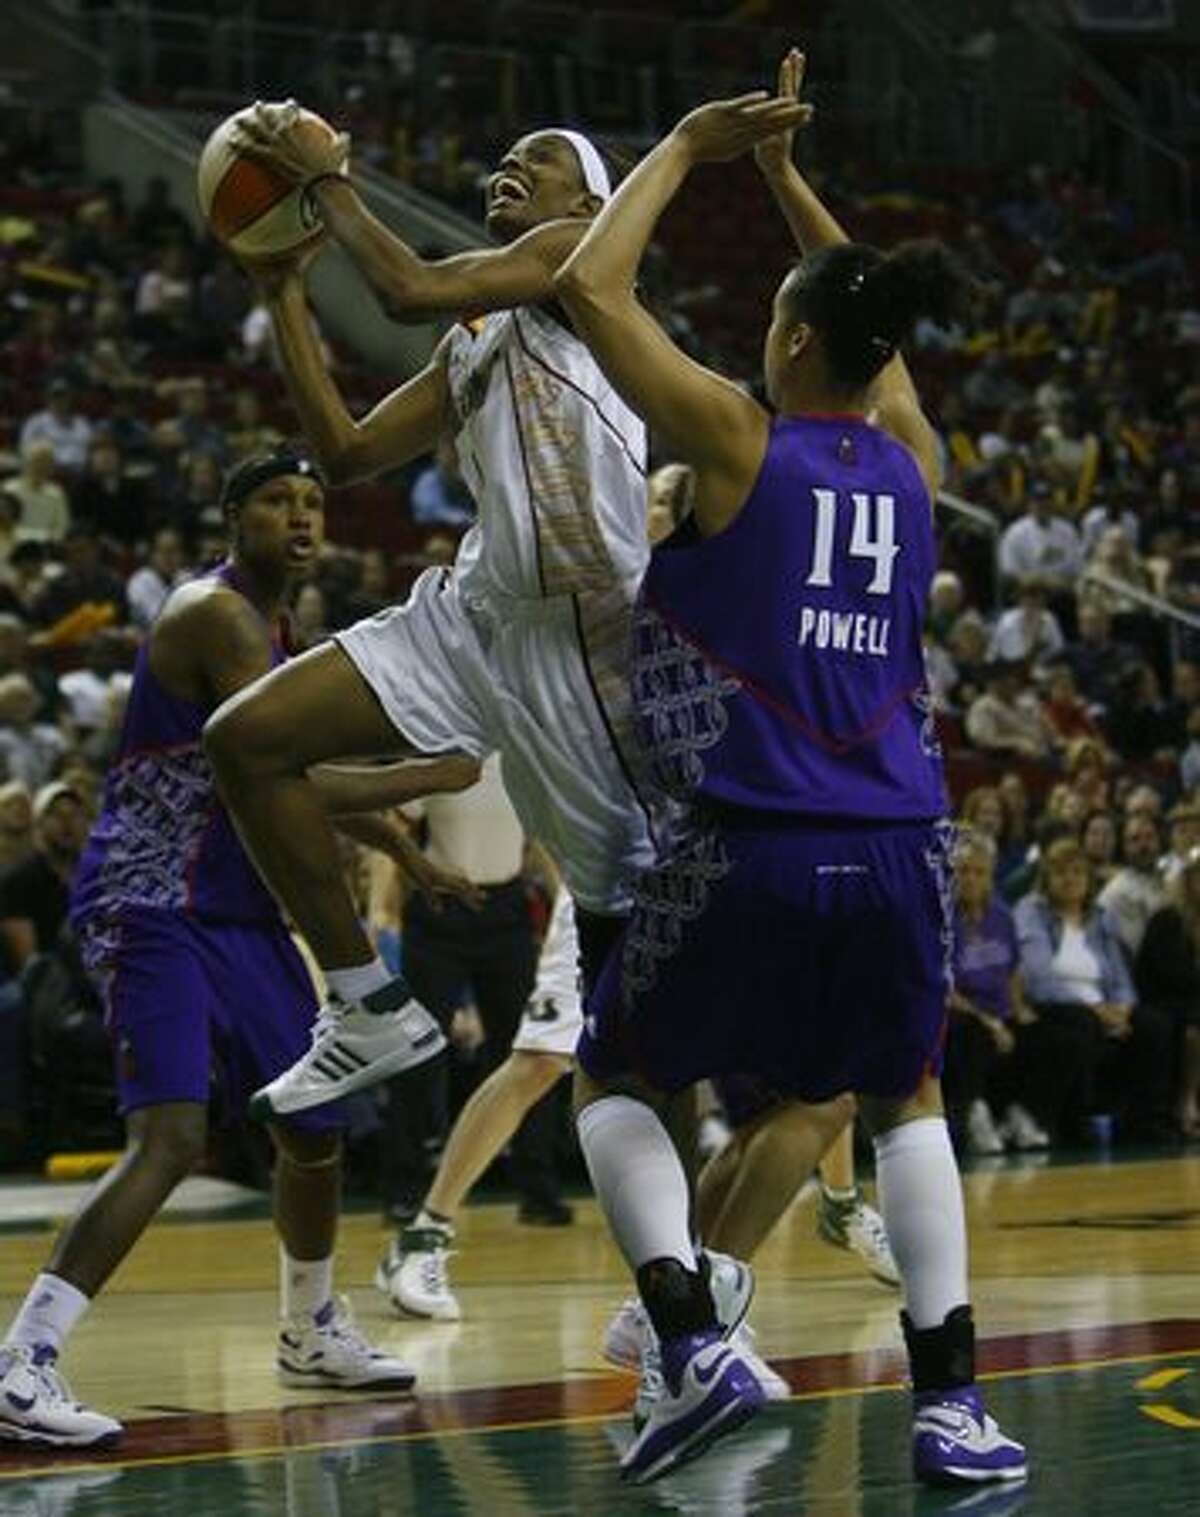 Seattle Storm’s Swin Cash goes to the hoop over Sacramento’s Nicole Powell in game 2 of the regular season at Key Arena in Seattle Tuesday May 20, 2008. (Photo/Seattle Post-Intelligencer, Gilbert W. Arias)